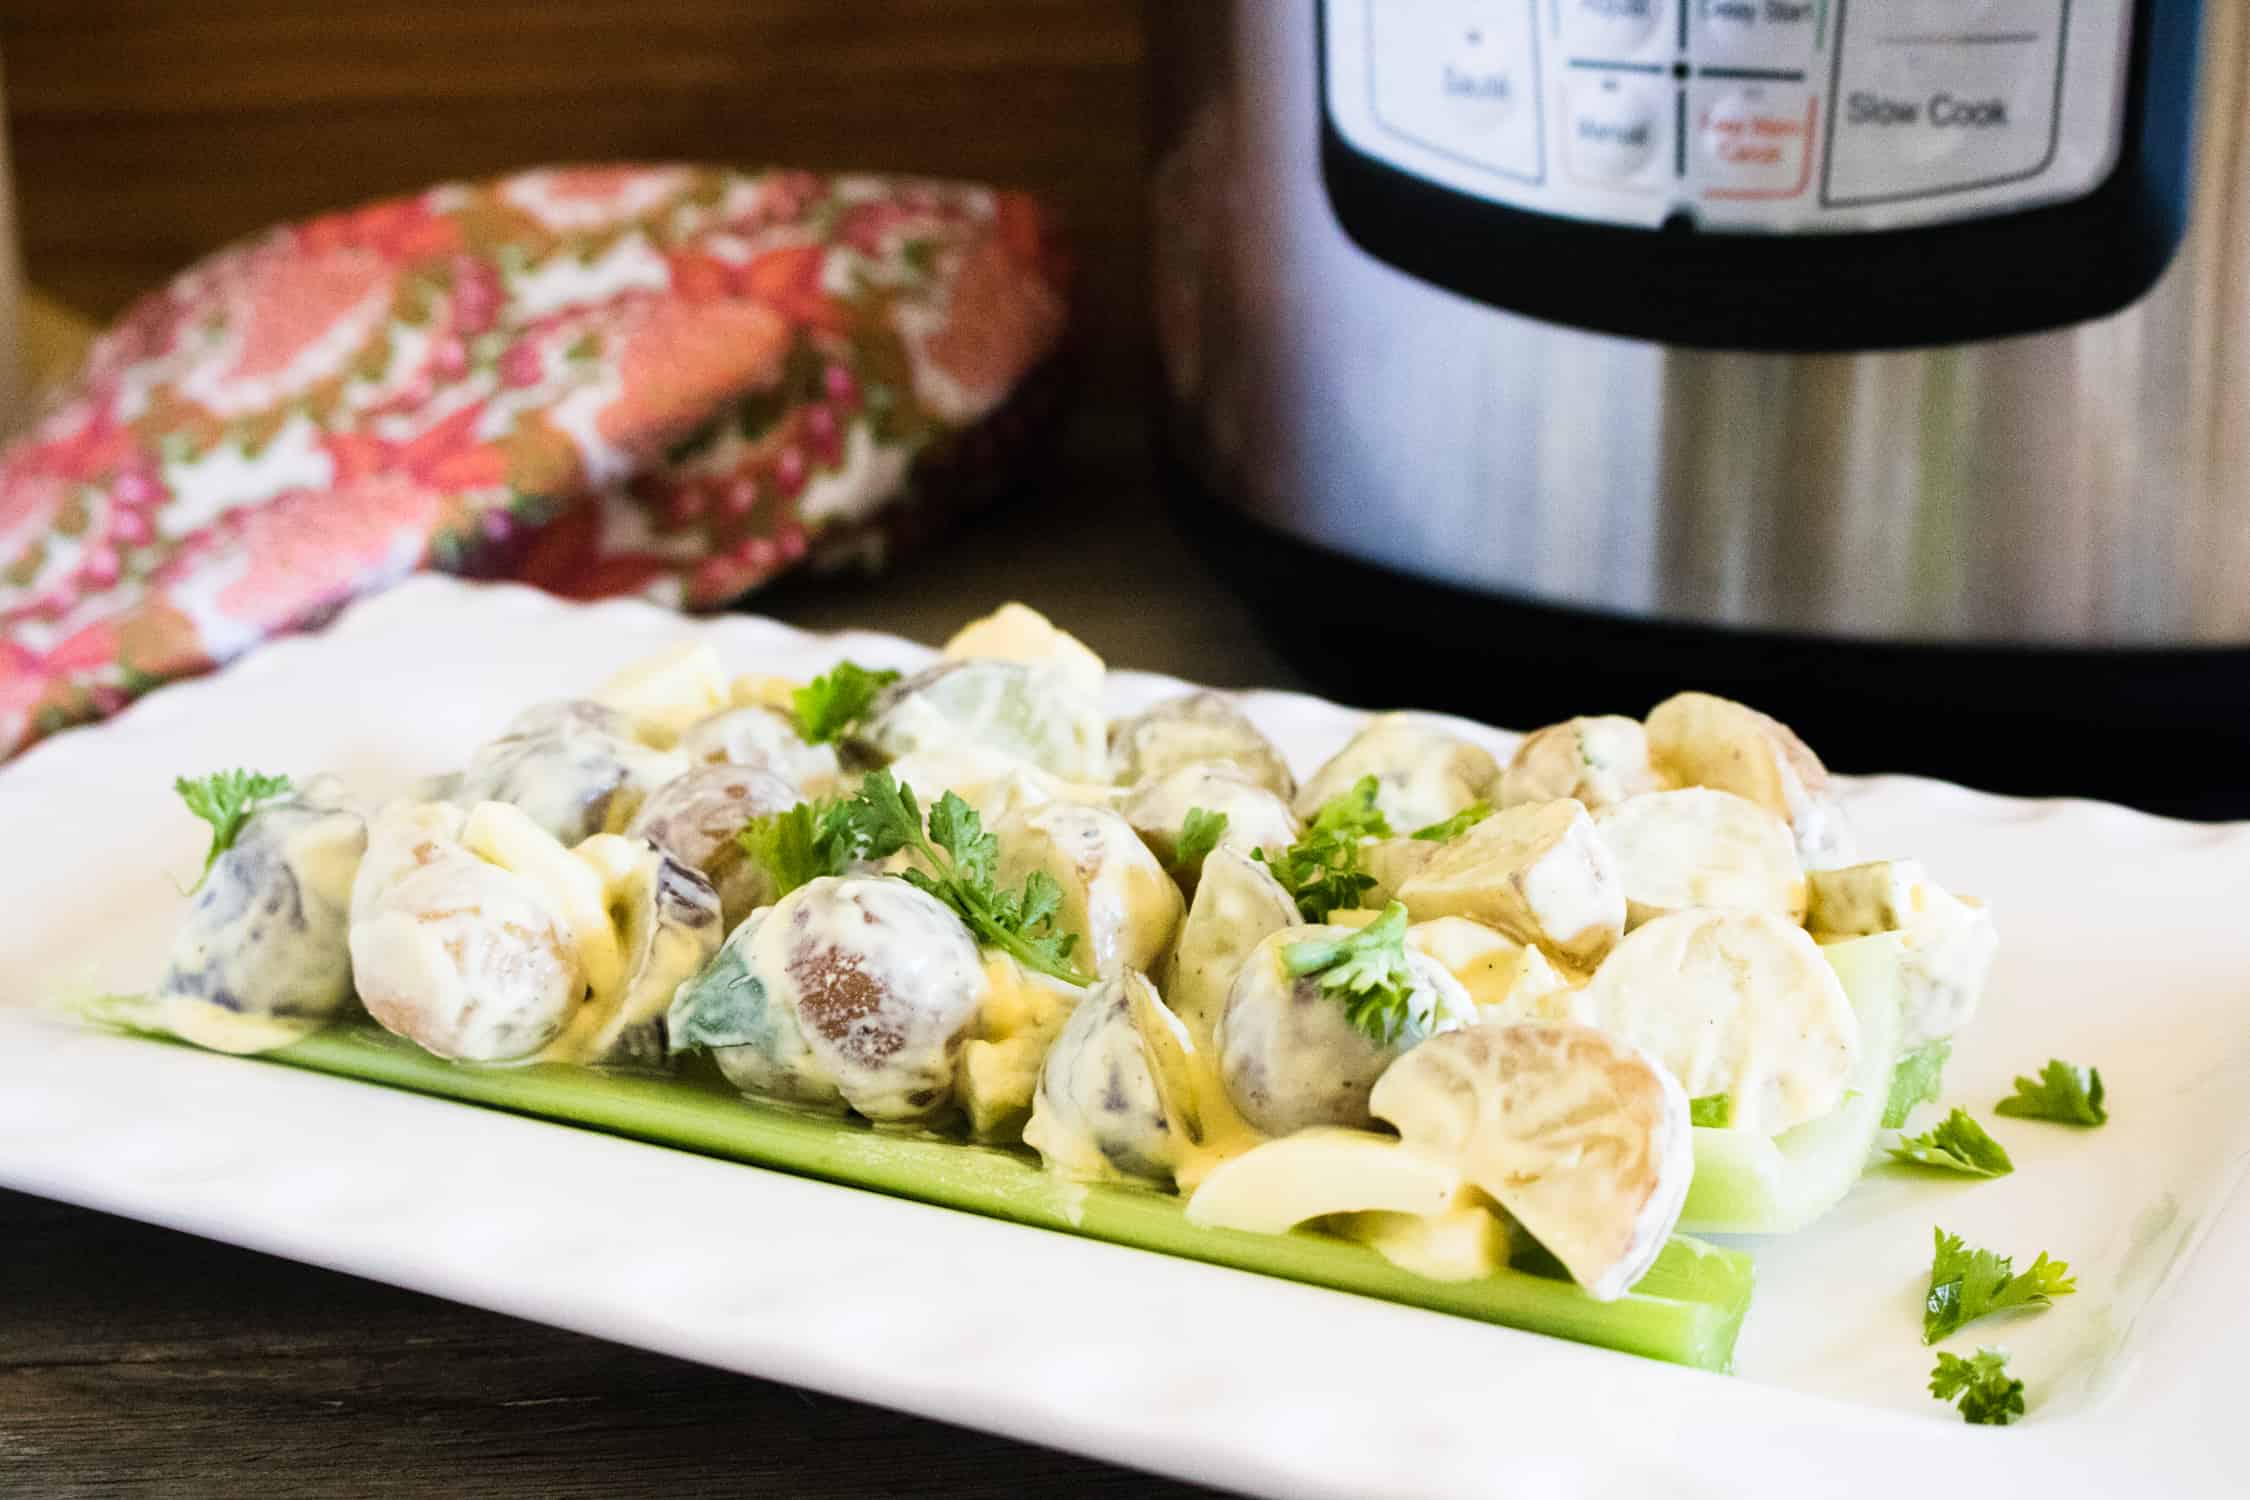 instant pot heirloom potato salad on rectangular white plate with silver instant pot and red printed towel in background